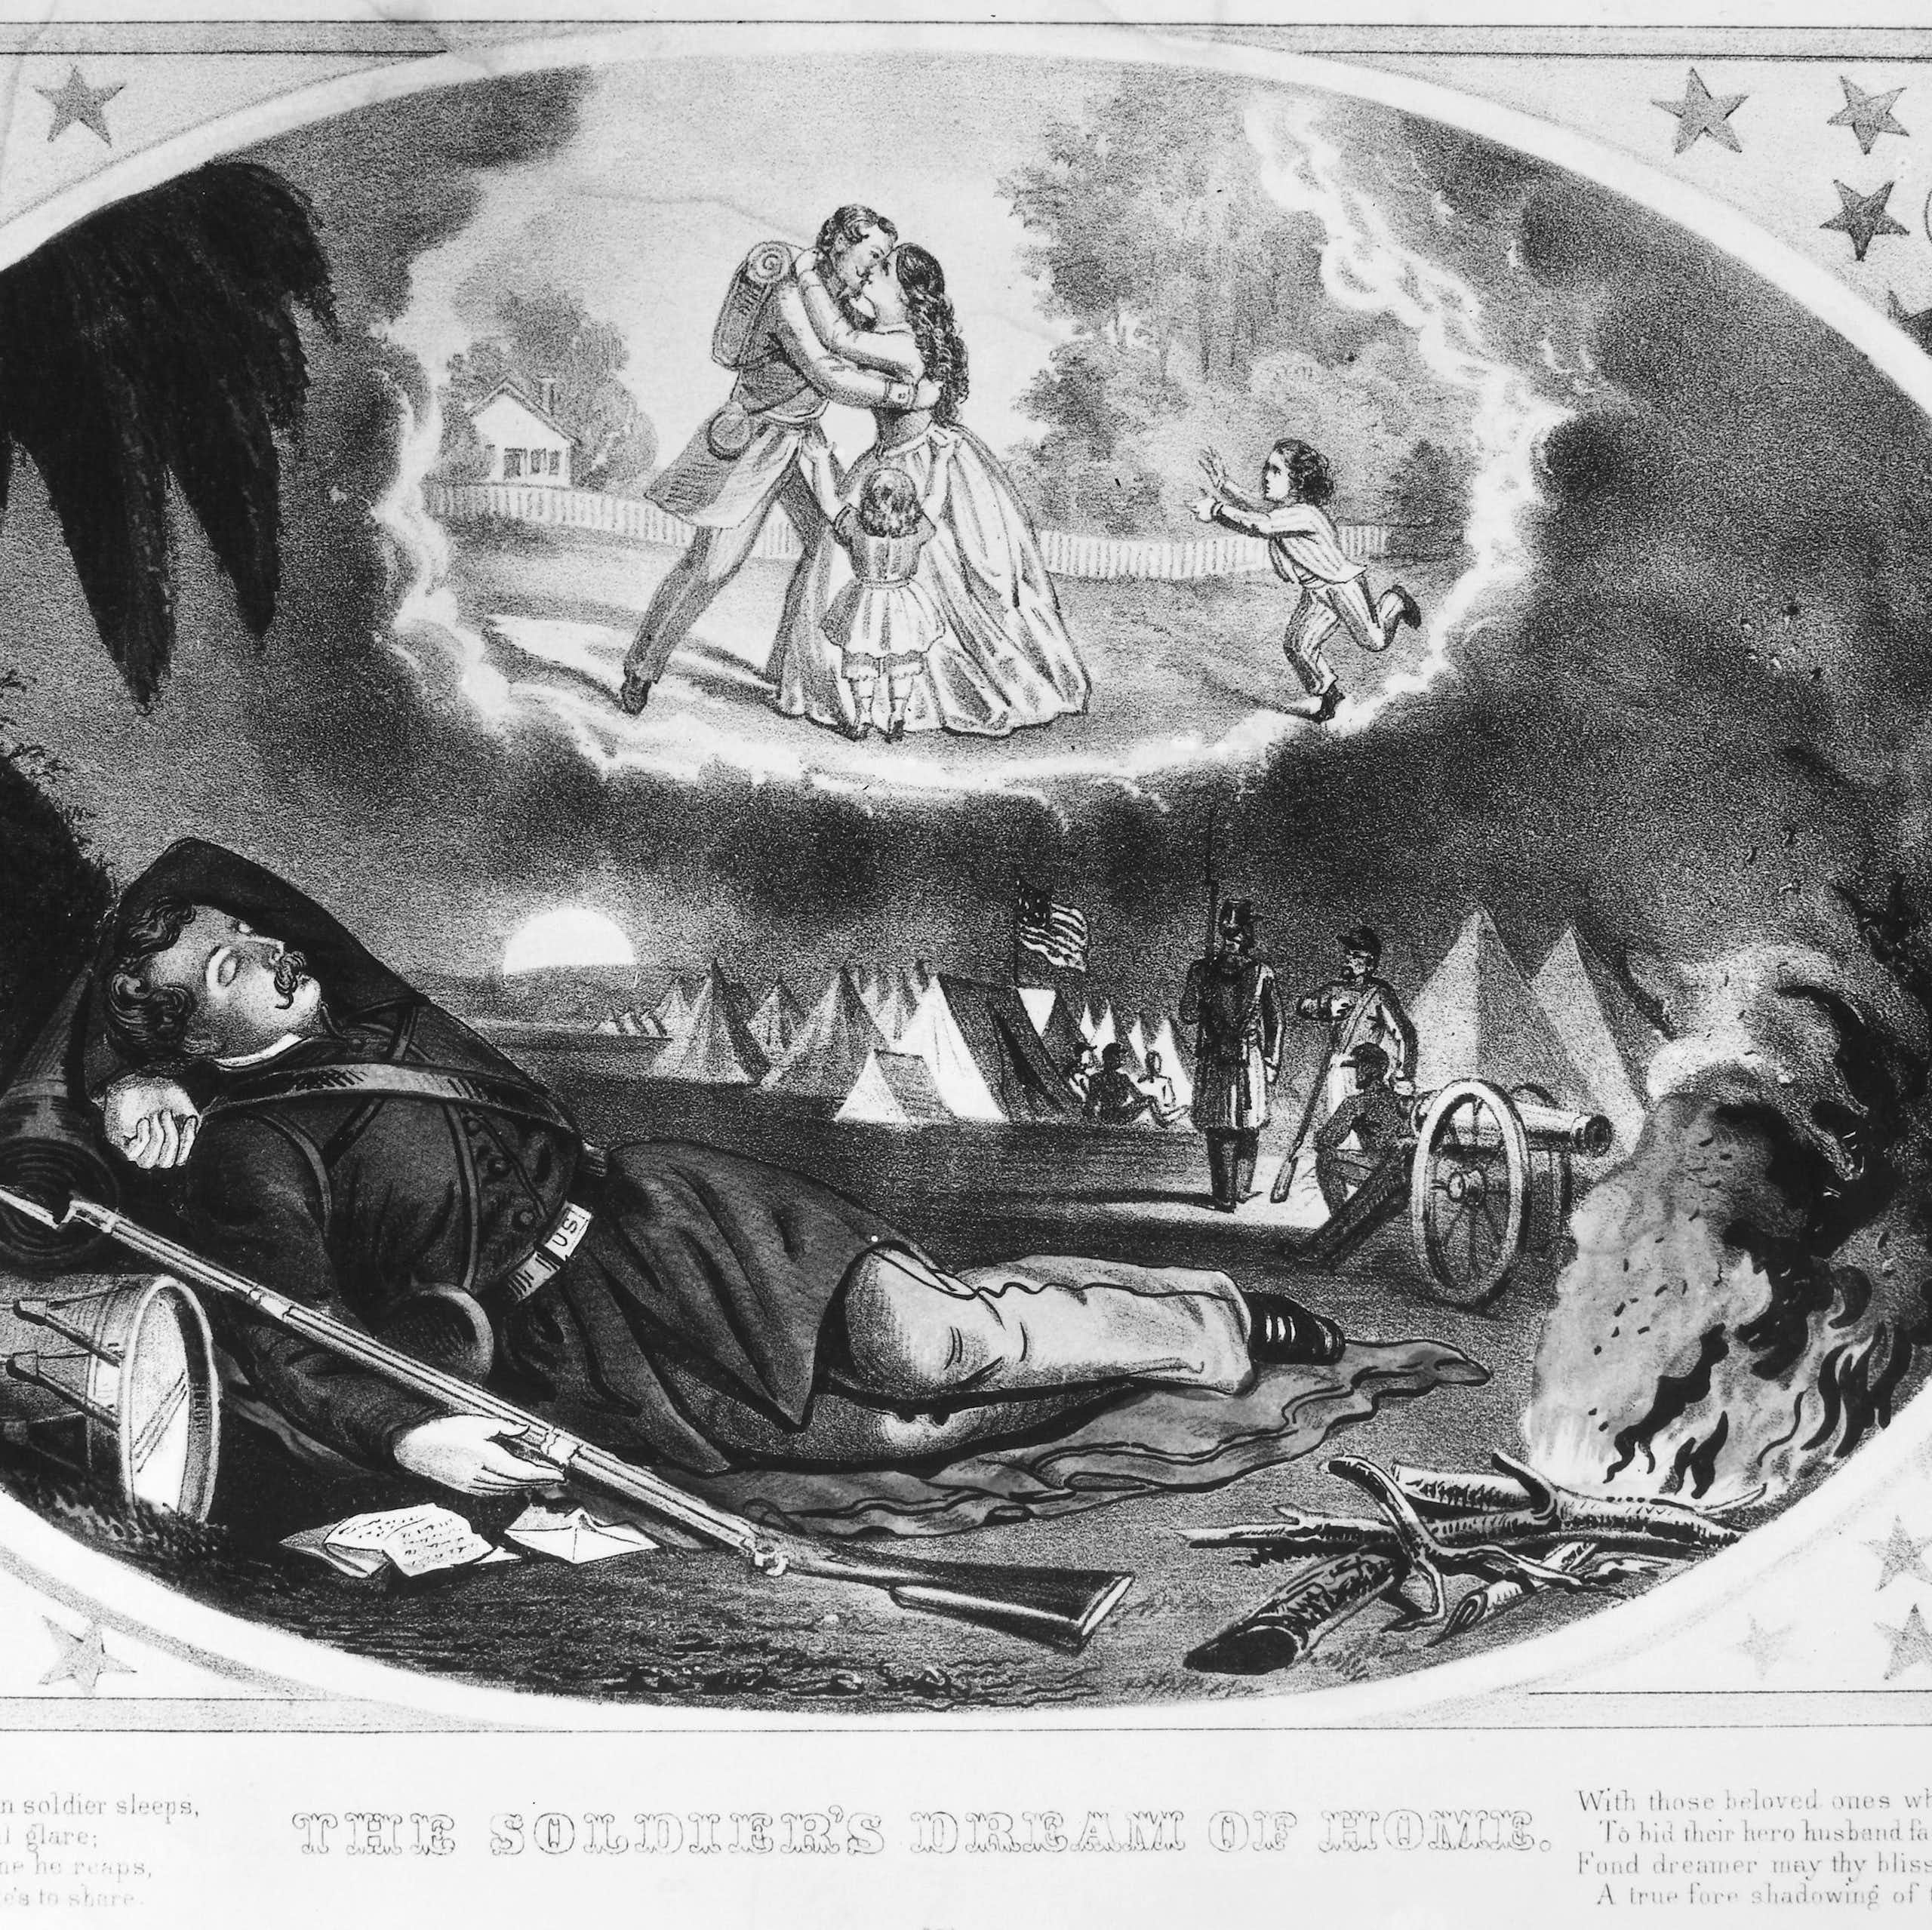 A lithograph of a union soldier, who lays on the ground and dreams about his family.